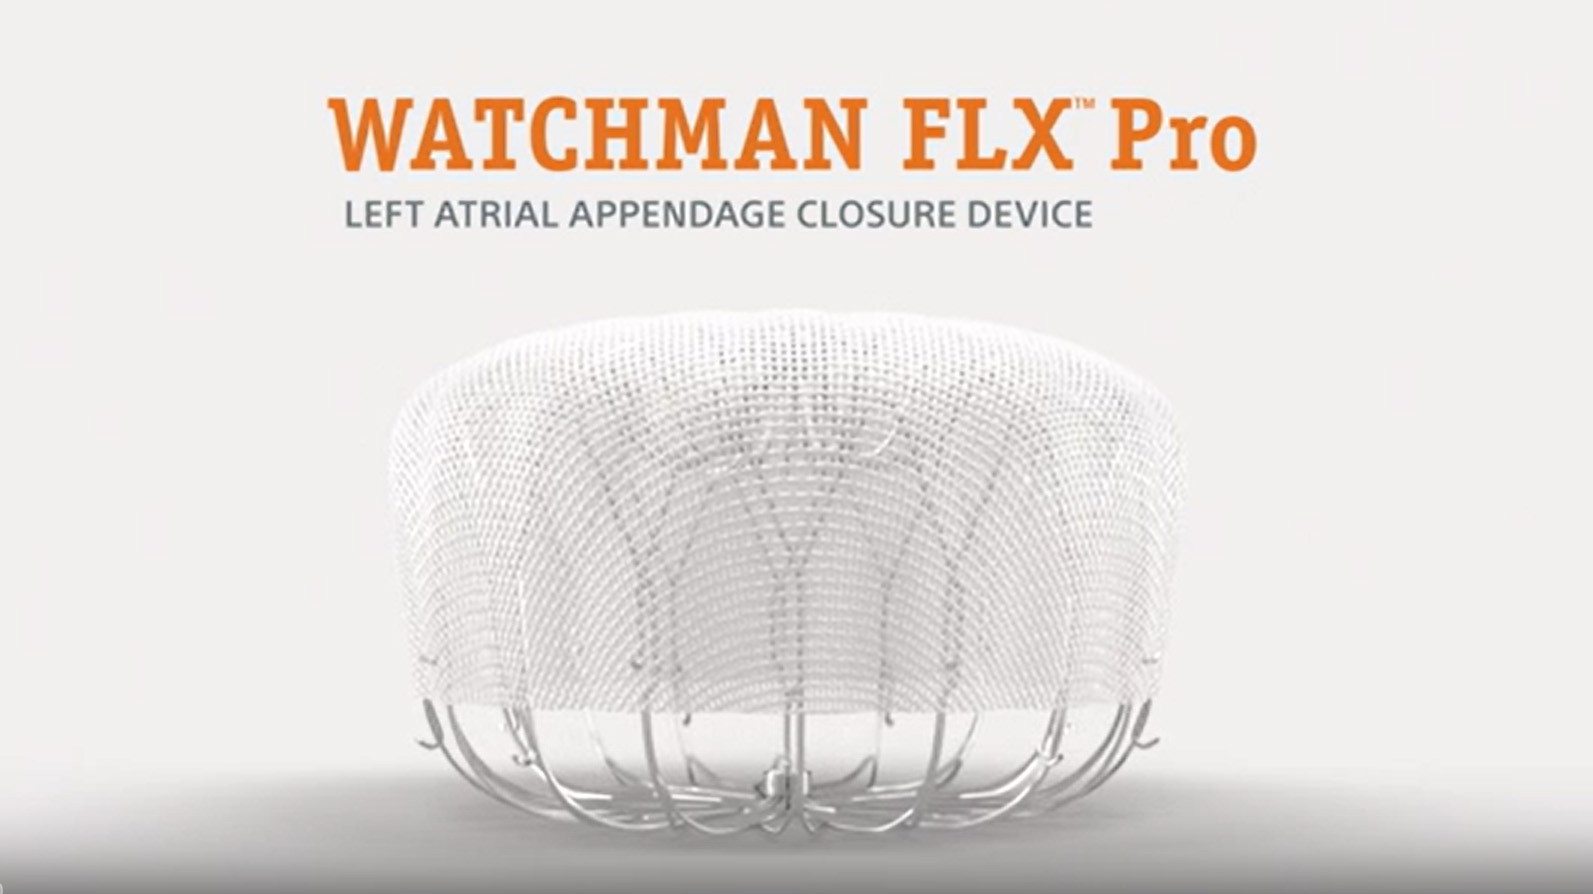 Play Video: Features and benefits of the WATCHMAN FLX™ Pro Left Atrial Appendage Closure Device